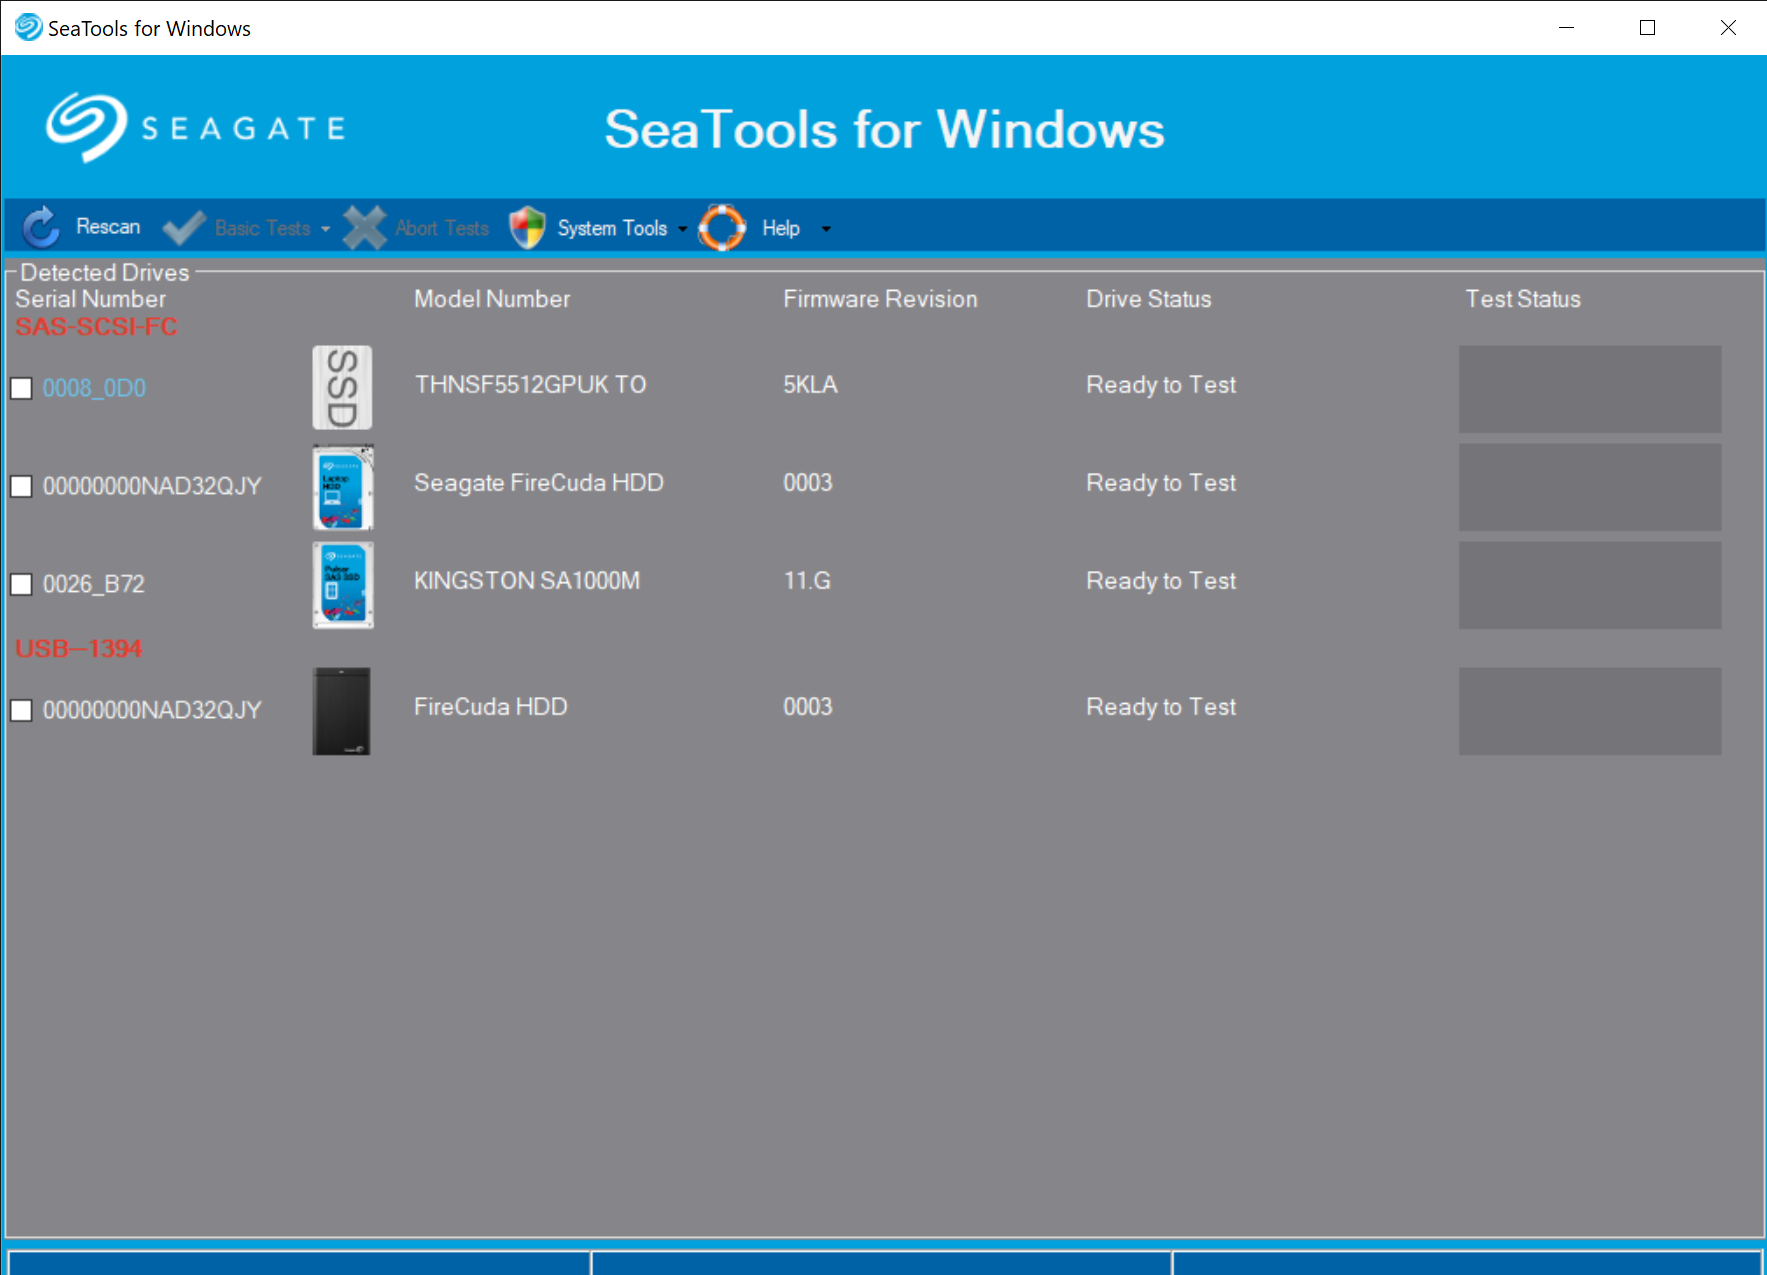 SeaTools for Windows 2 18 2022 9 29 16 AM